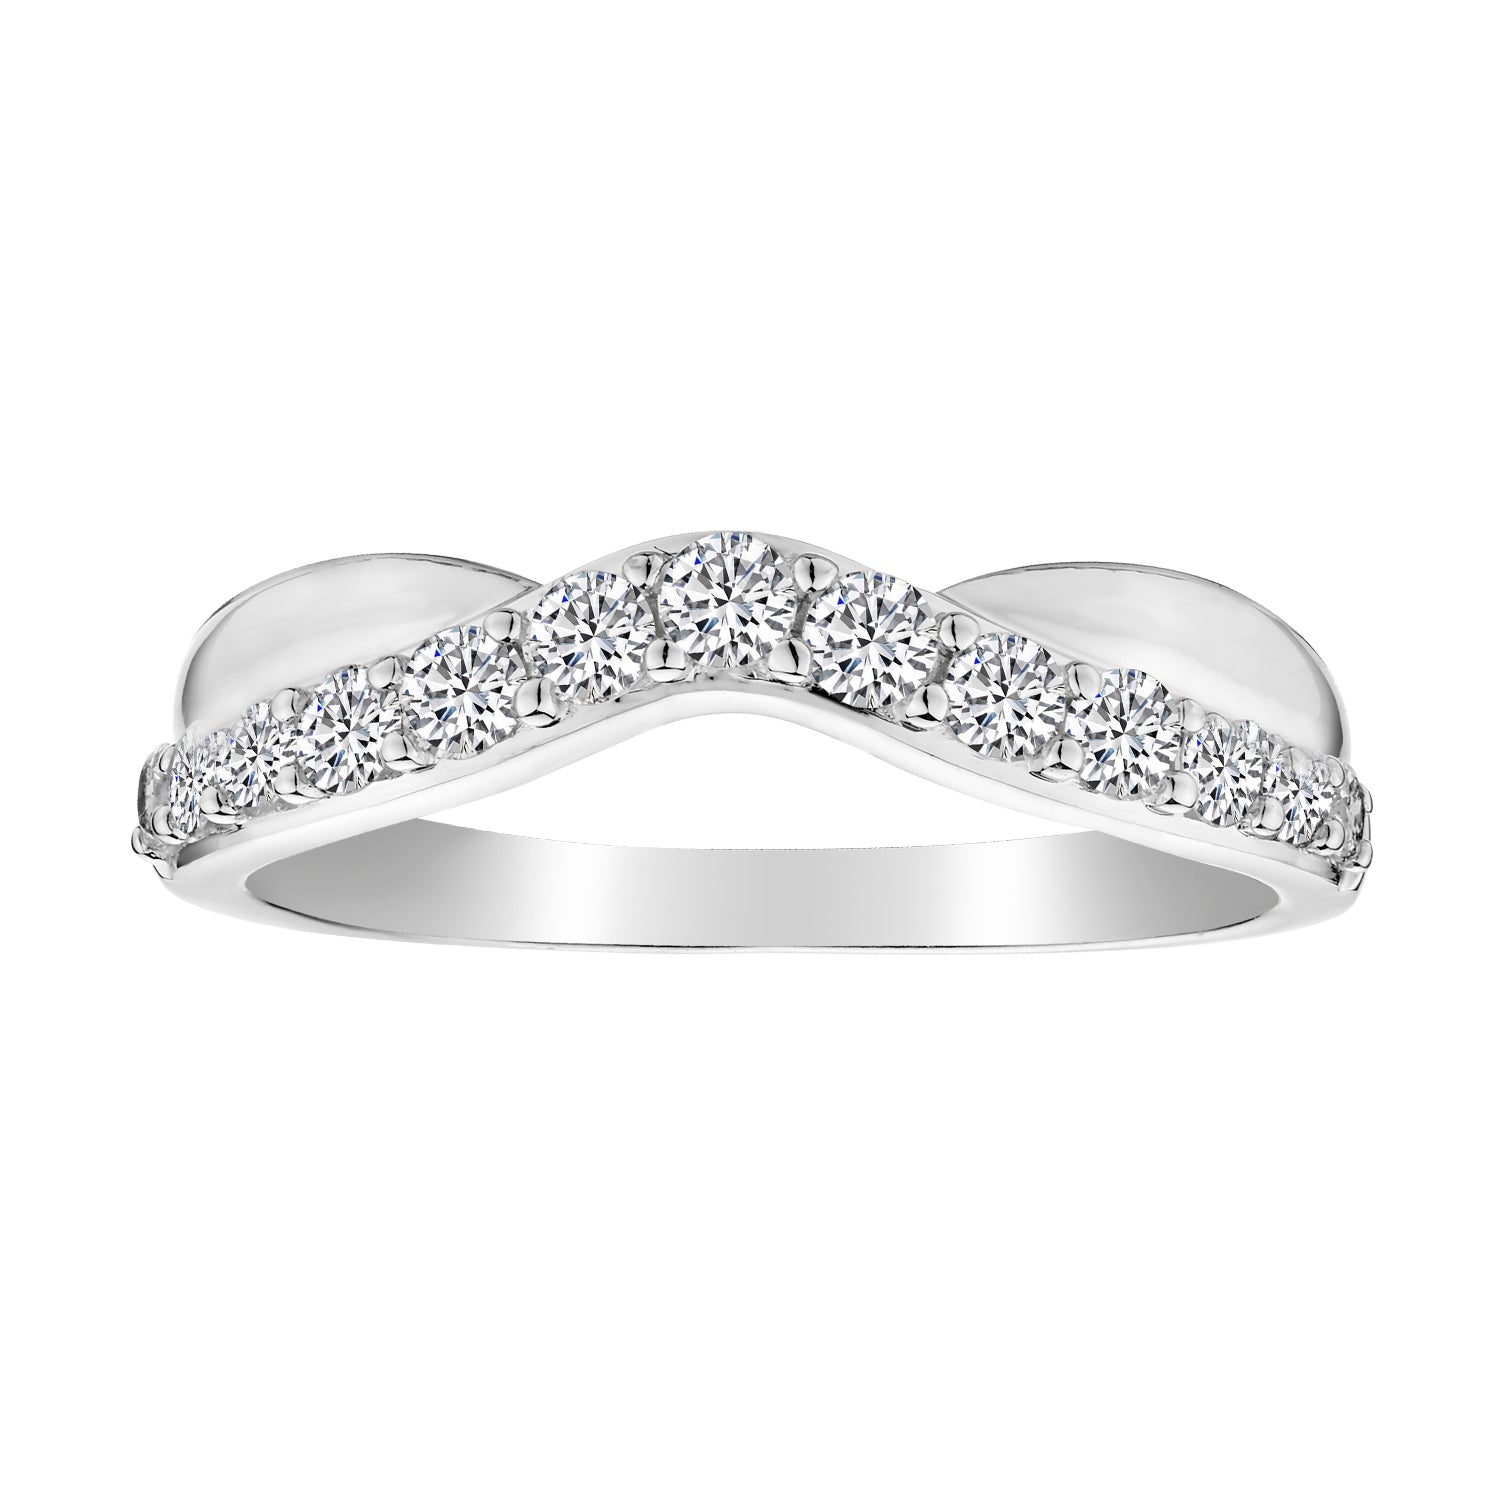 .50 Carat of Diamonds Band Ring, 14kt White Gold.......................NOW